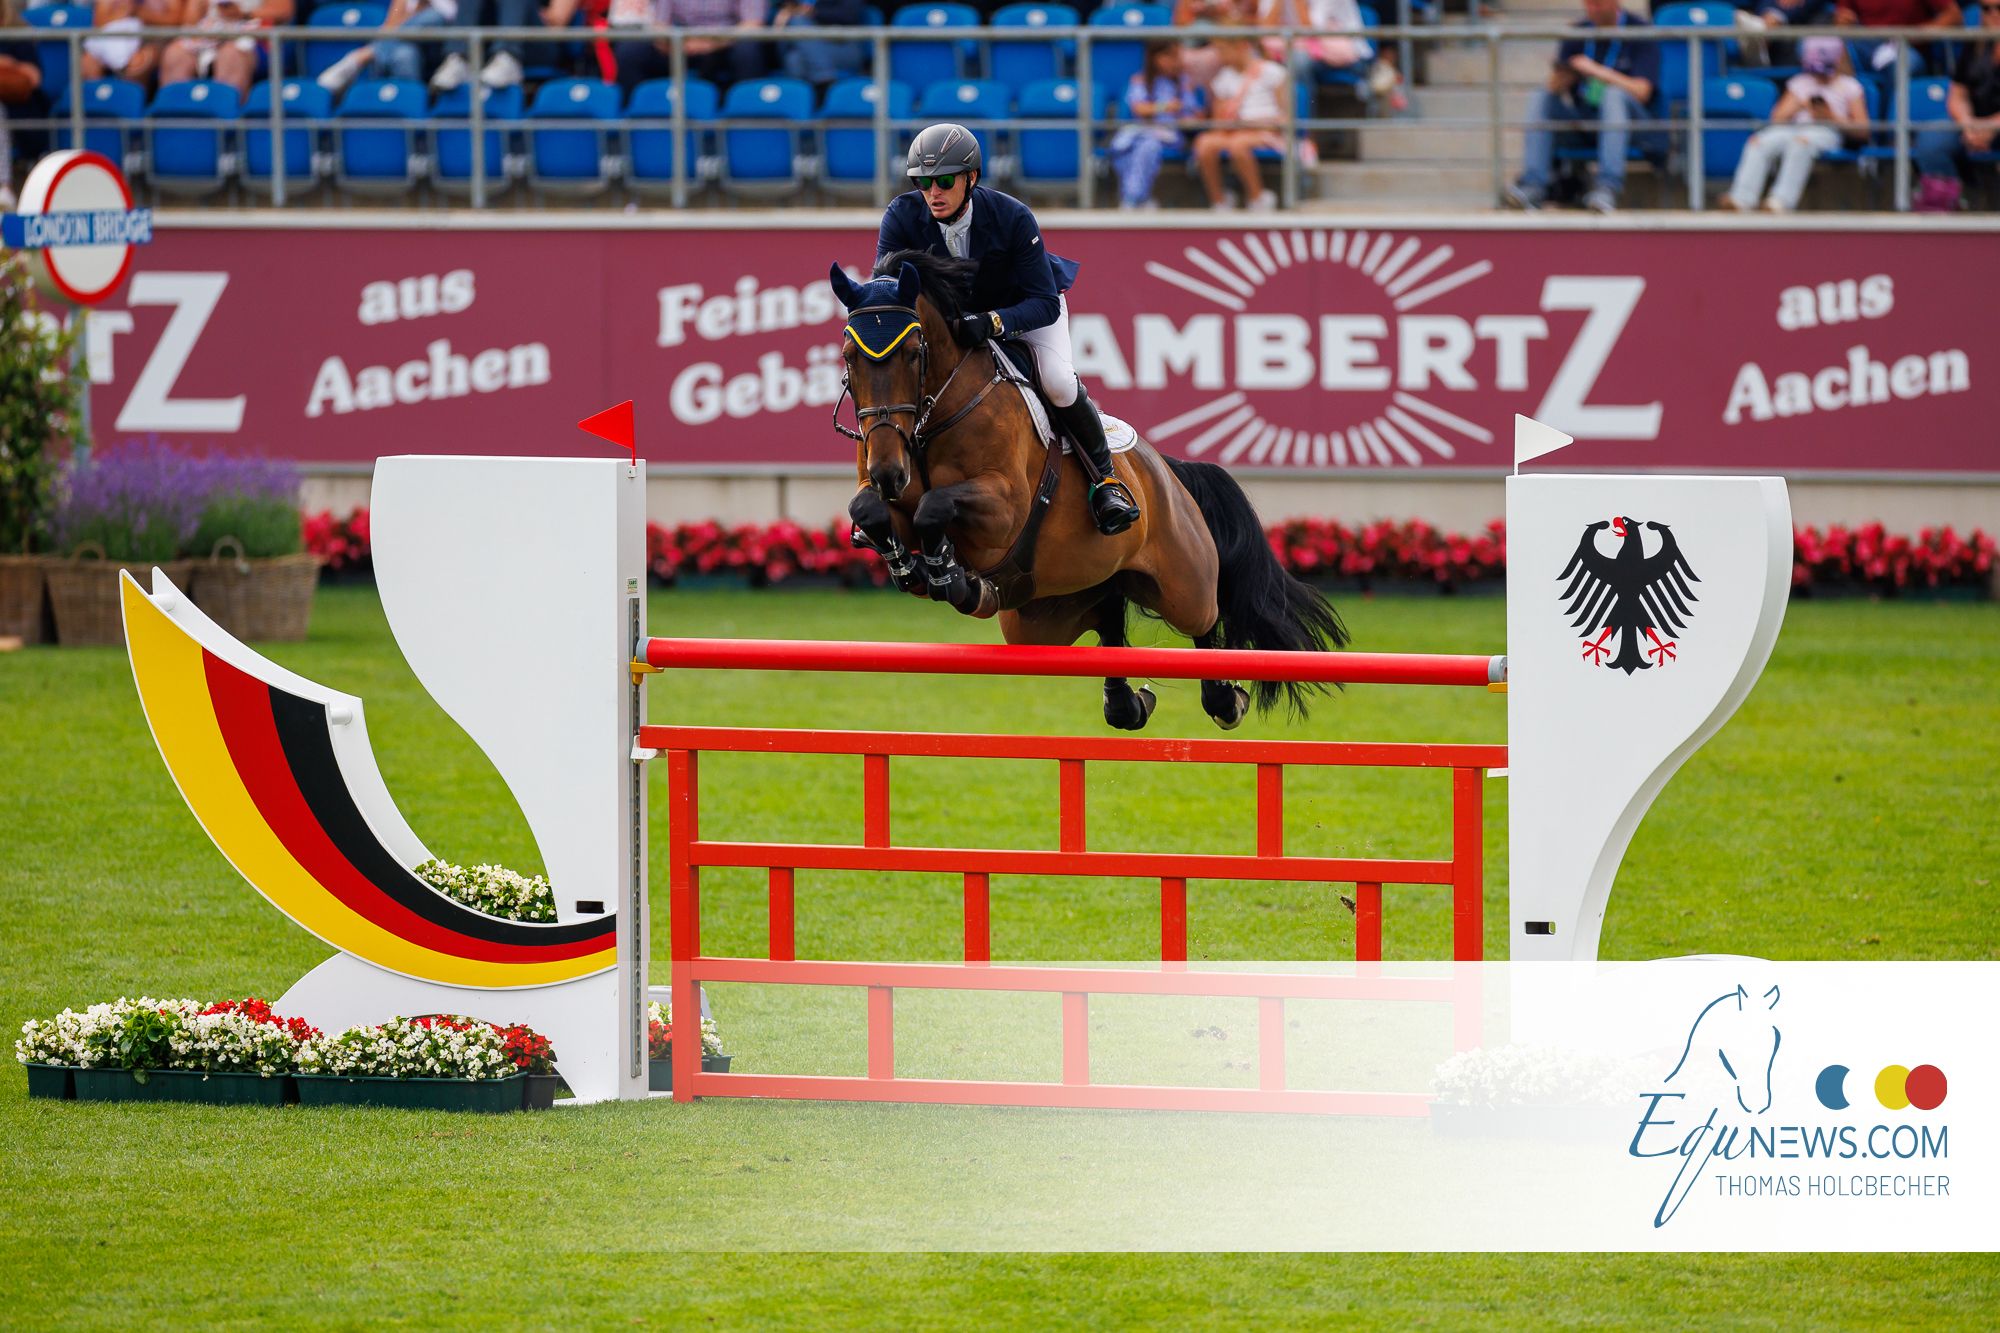 Daniel Coyle claims victory in CSI5* 1.50m Prize of Städte Region Aachen